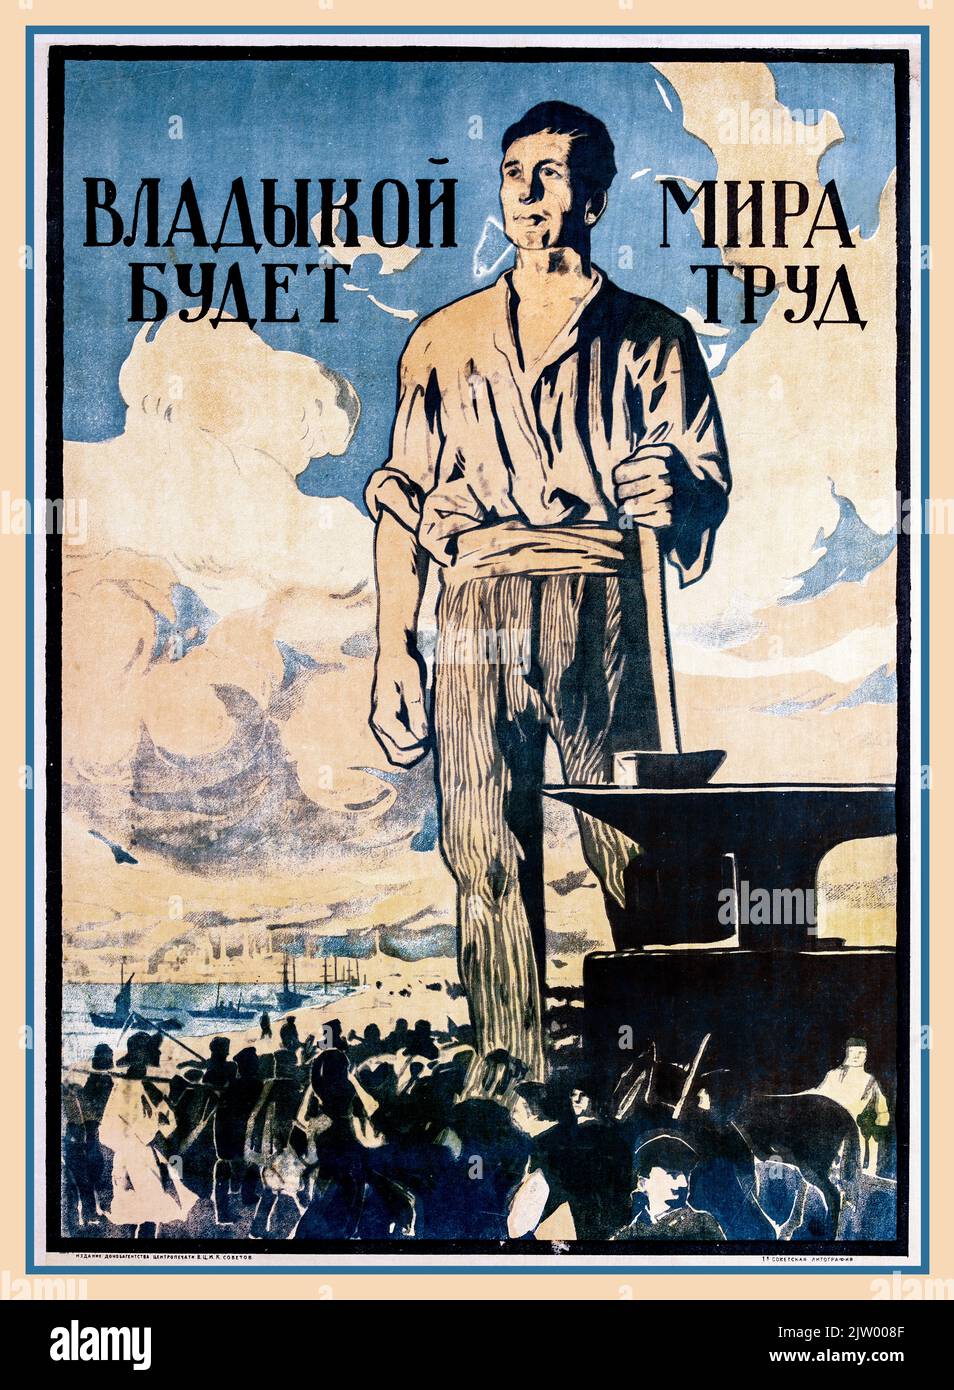 Vintage USSR 1919-1920s Russian Propaganda Poster ”Labour will rule the world”. Poster.with workman holding a hammer on a metal anvil. Русский: ”Владыкой мира будет труд”.  Date between 1919 and 1920 Stock Photo